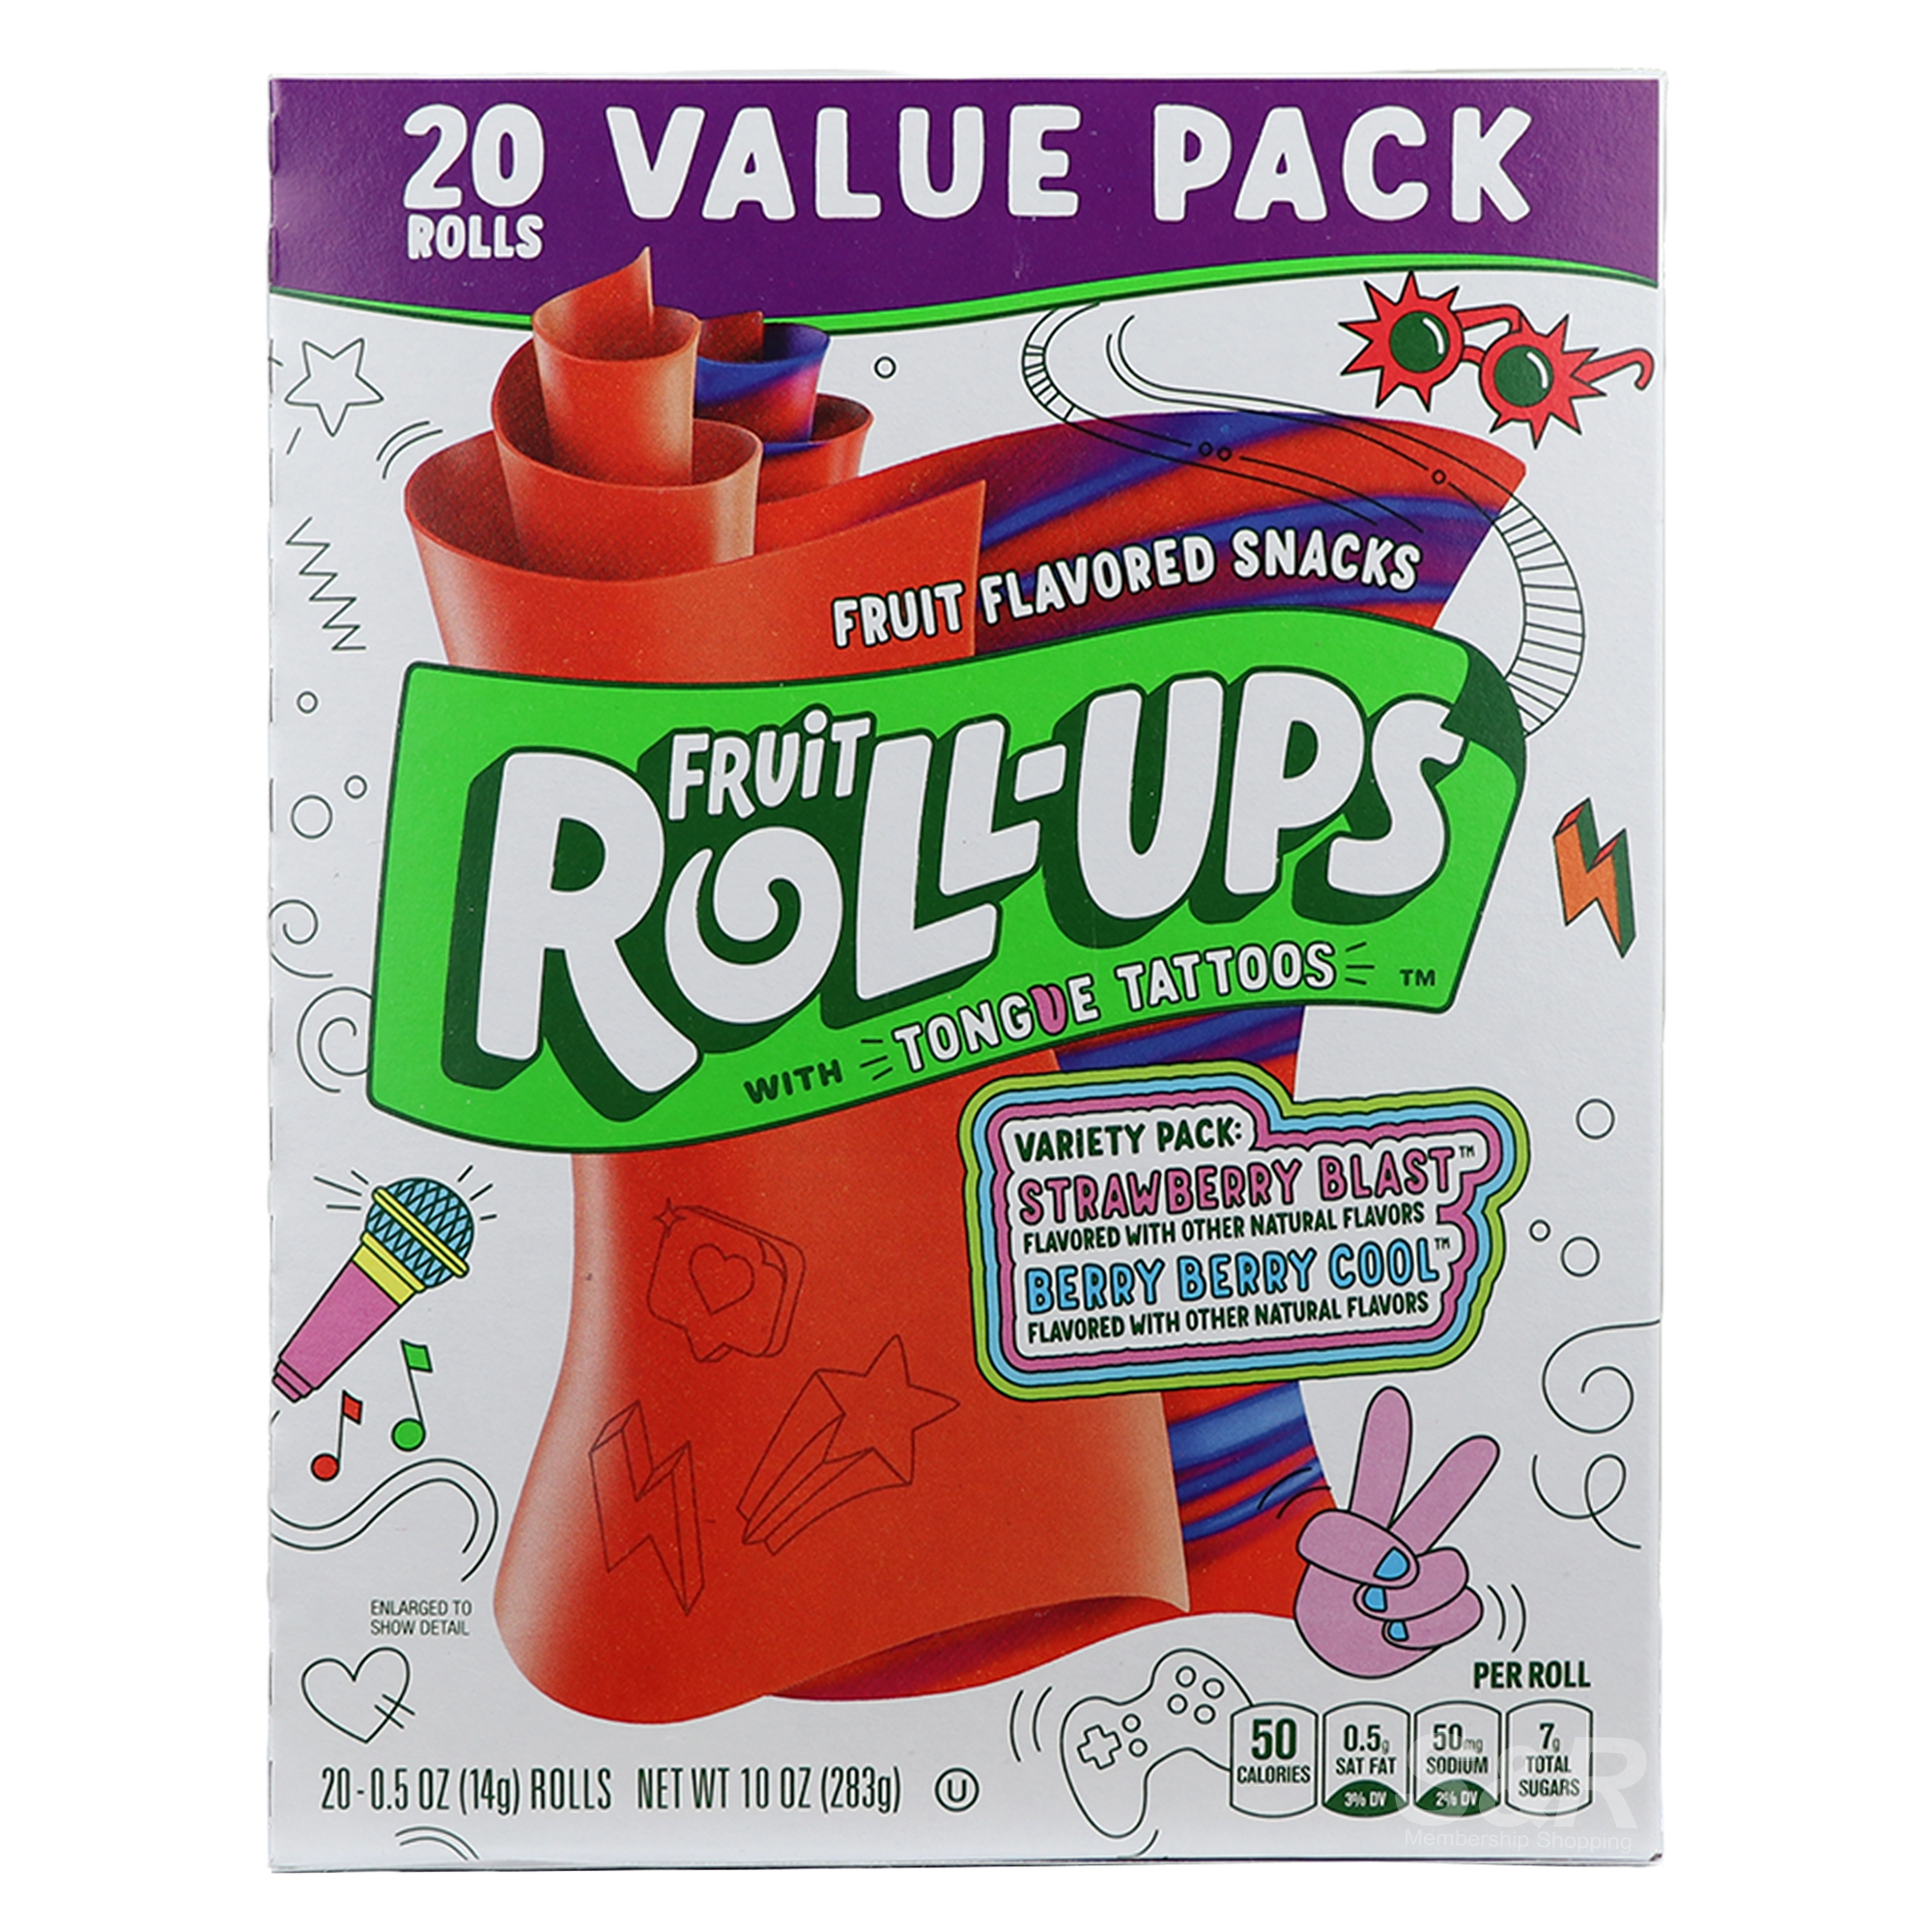 Fruit Roll-Ups with Tongue Tattoos 20 Rolls